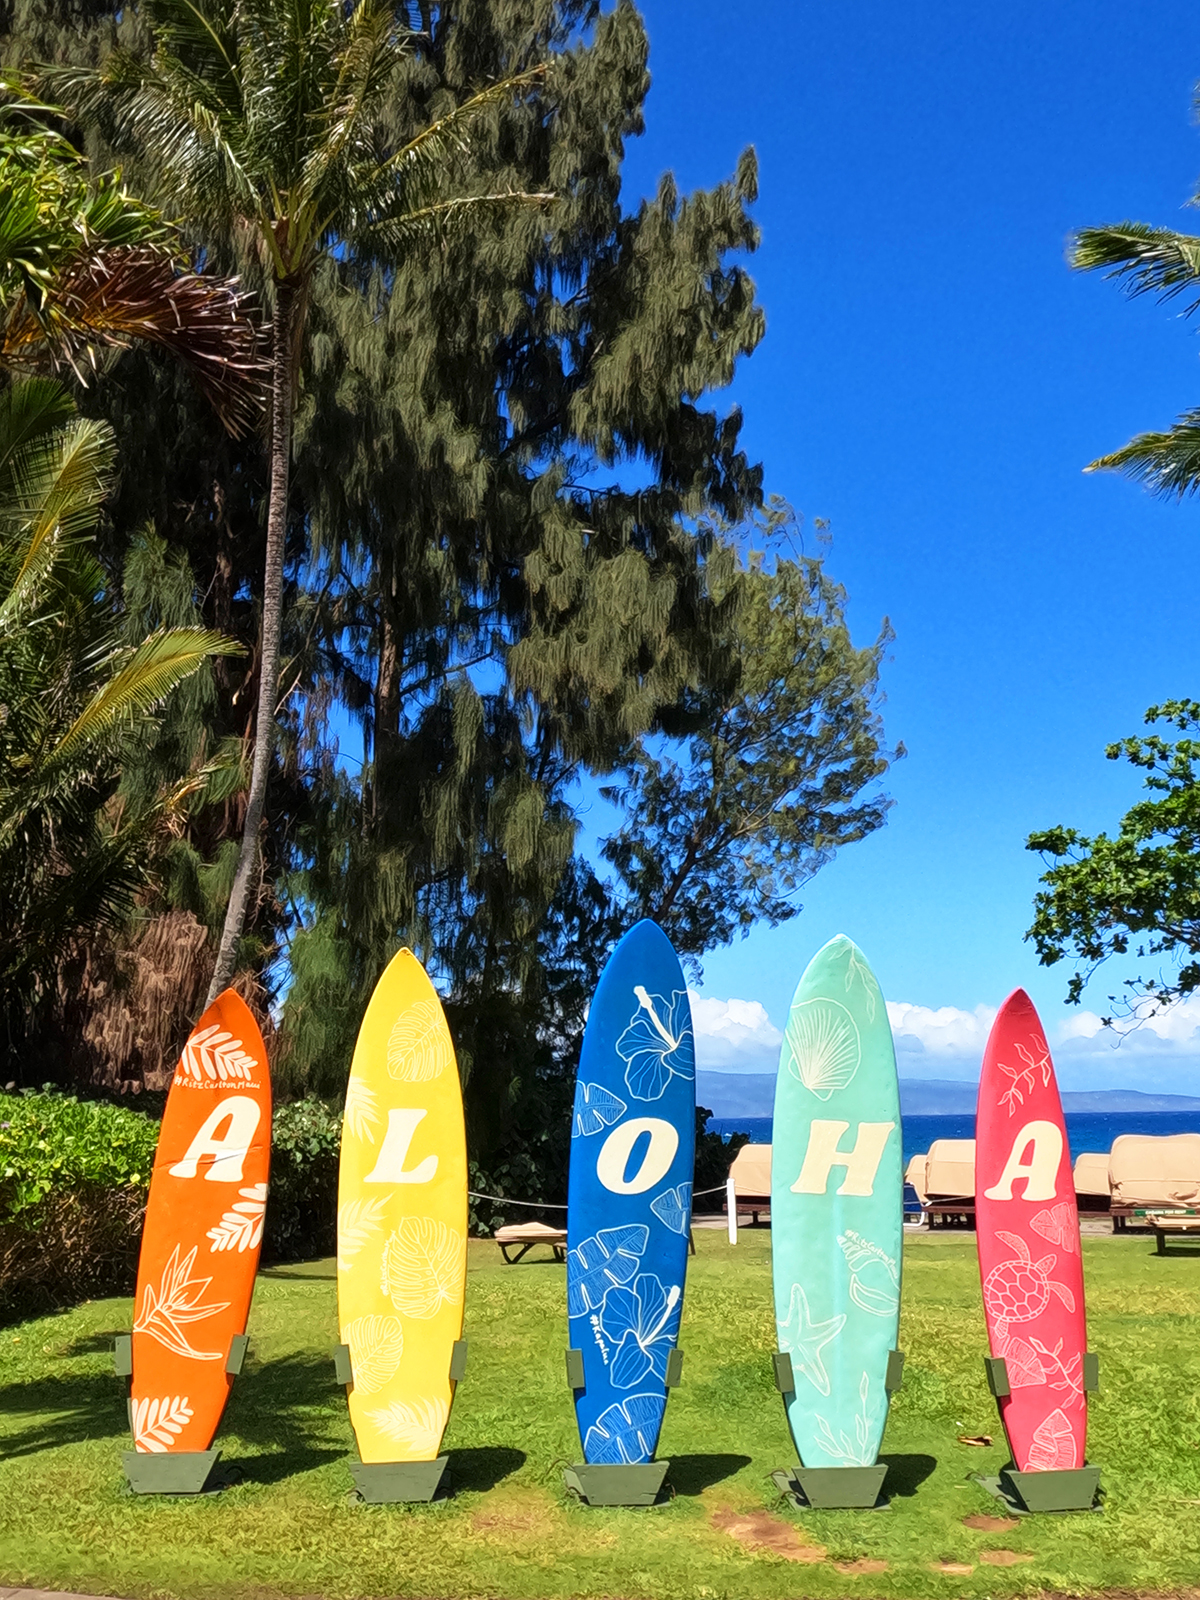 maui with kids colorful surfboards aloha with trees and ocean in background